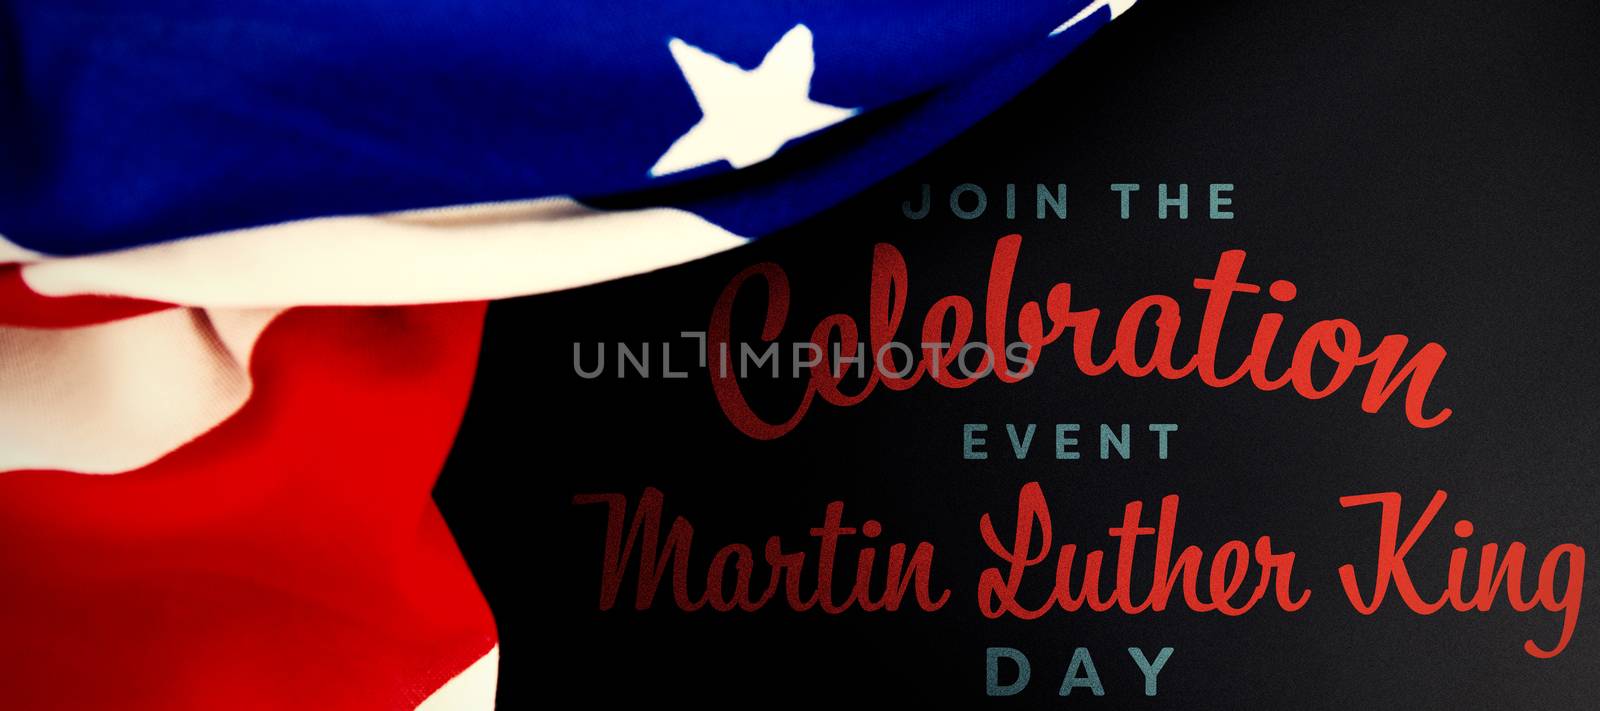 join the celebration event Martin Luther King Day against american flag on empty slate